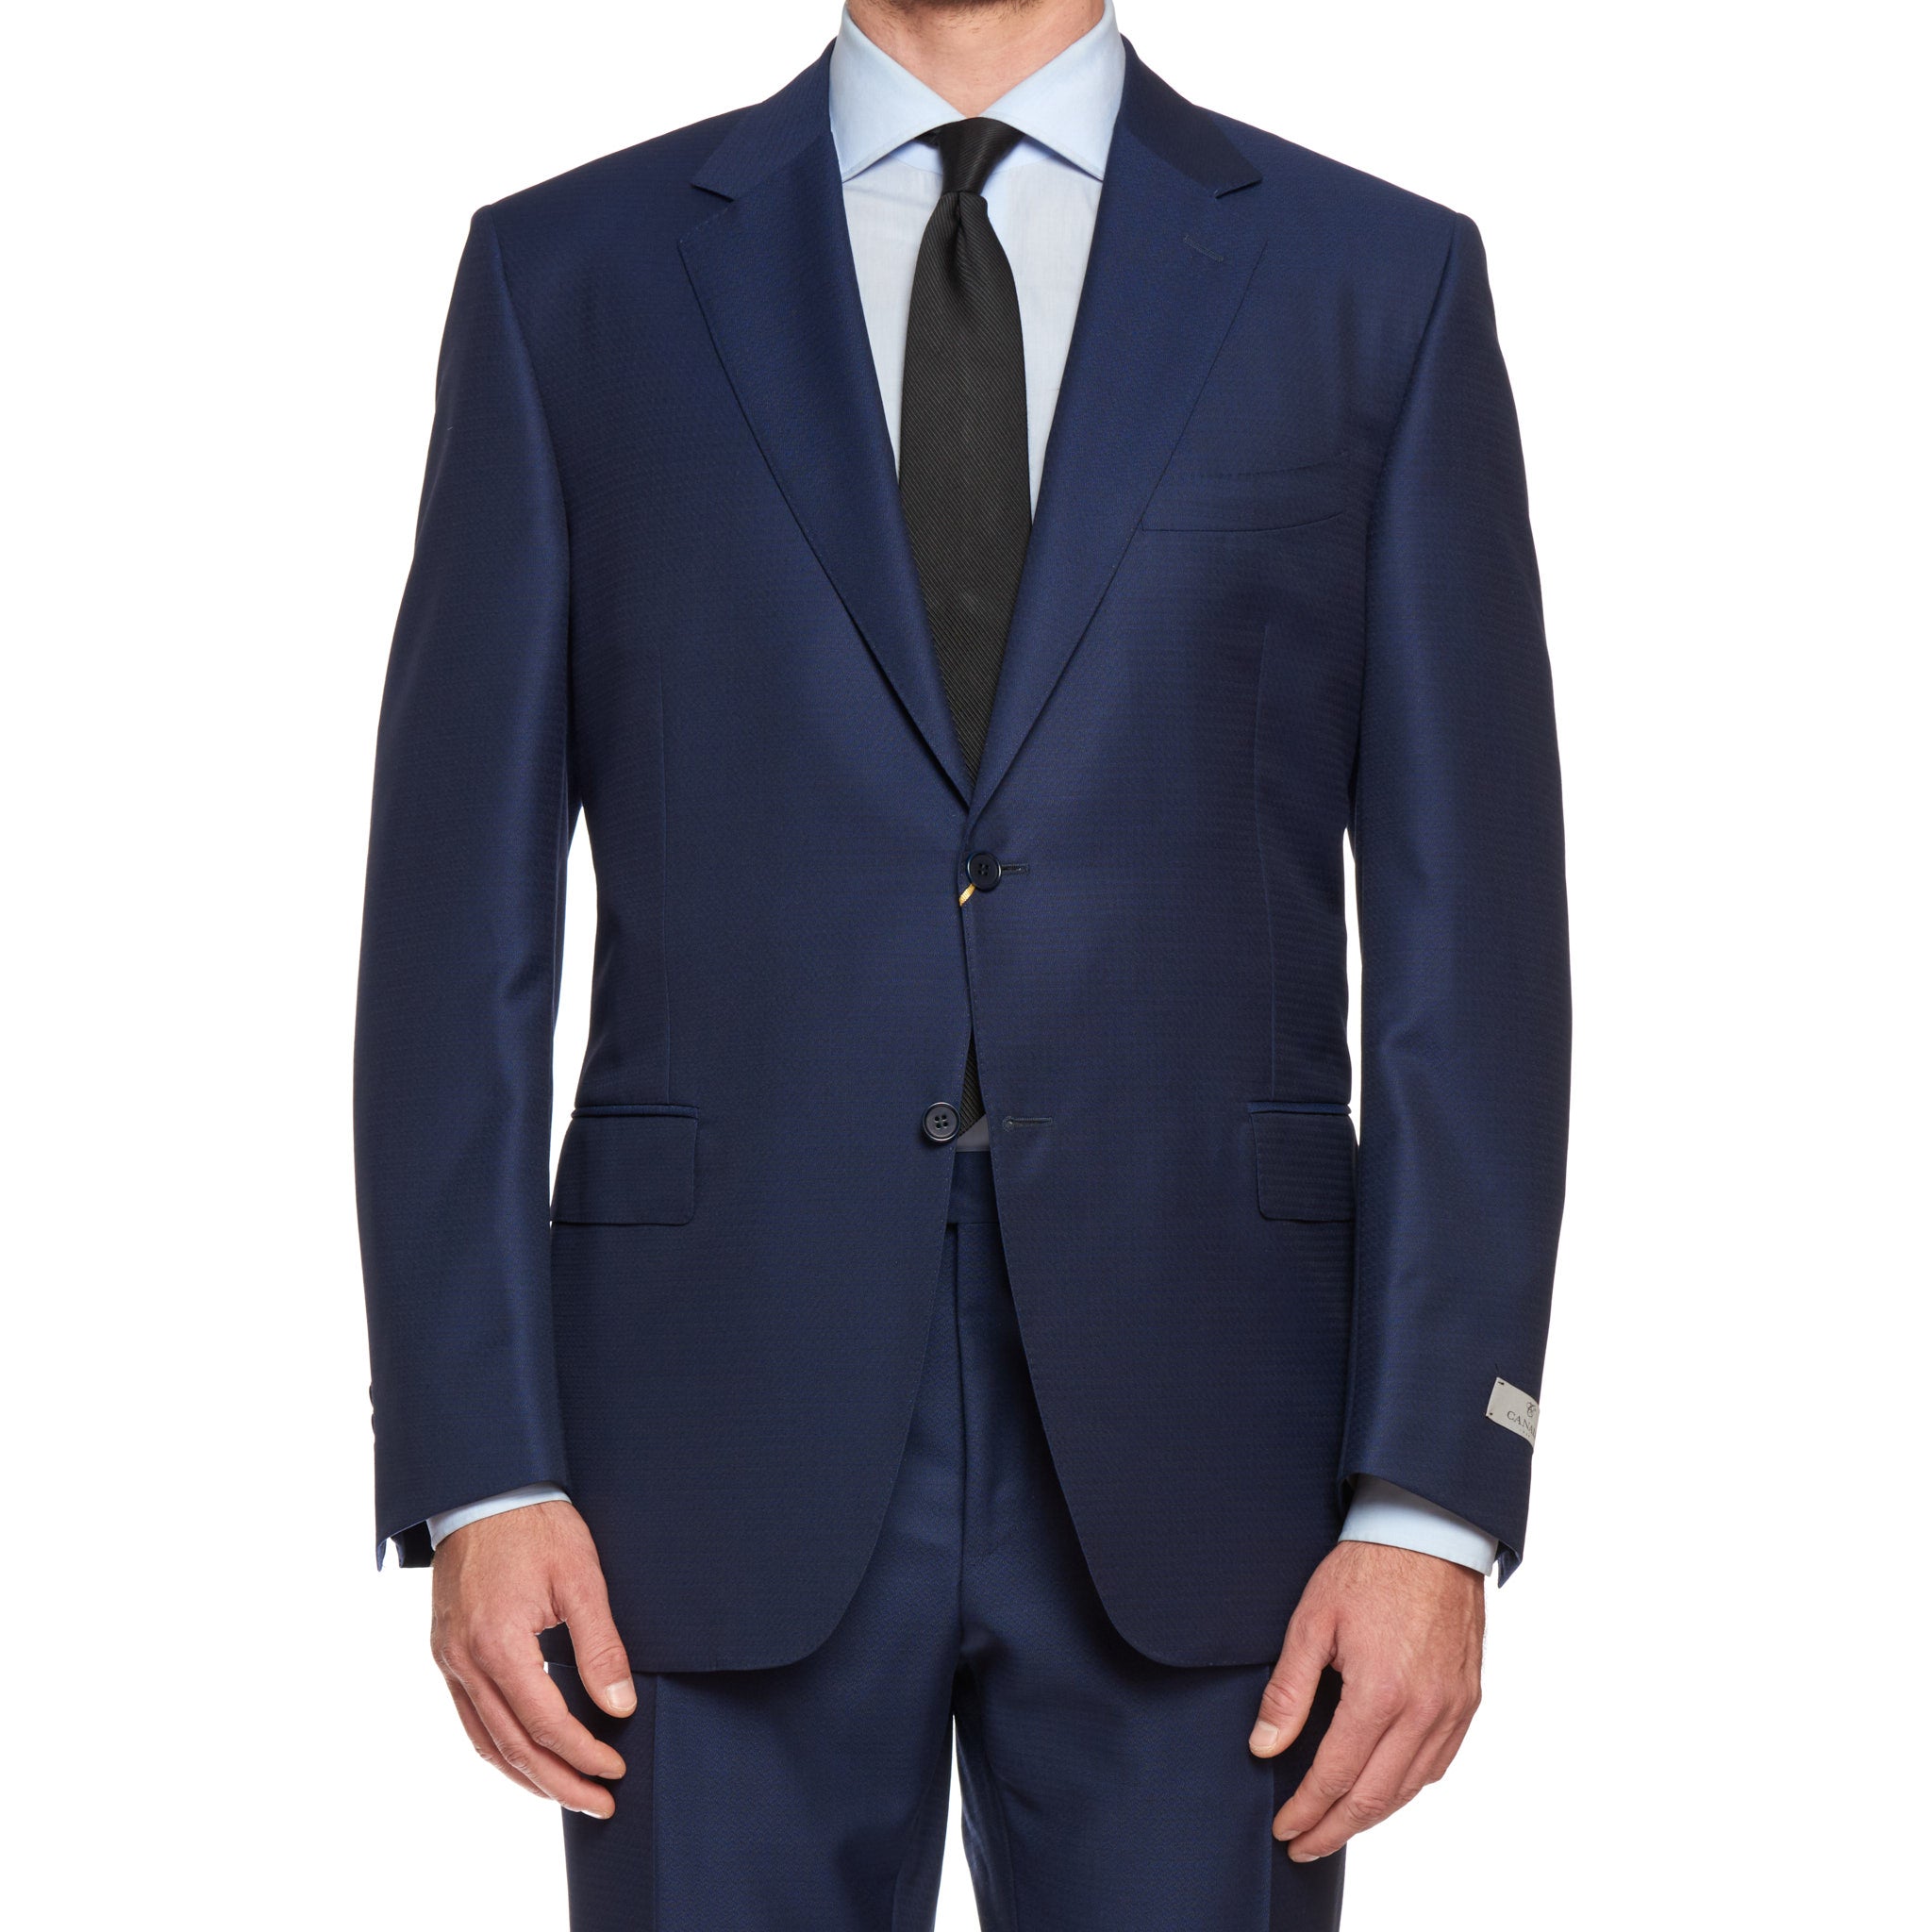 CANALI 1934 "Travel" Navy Blue Jacquard Wool-Mohair Suit EU 56 NEW US 46 Current Model CANALI